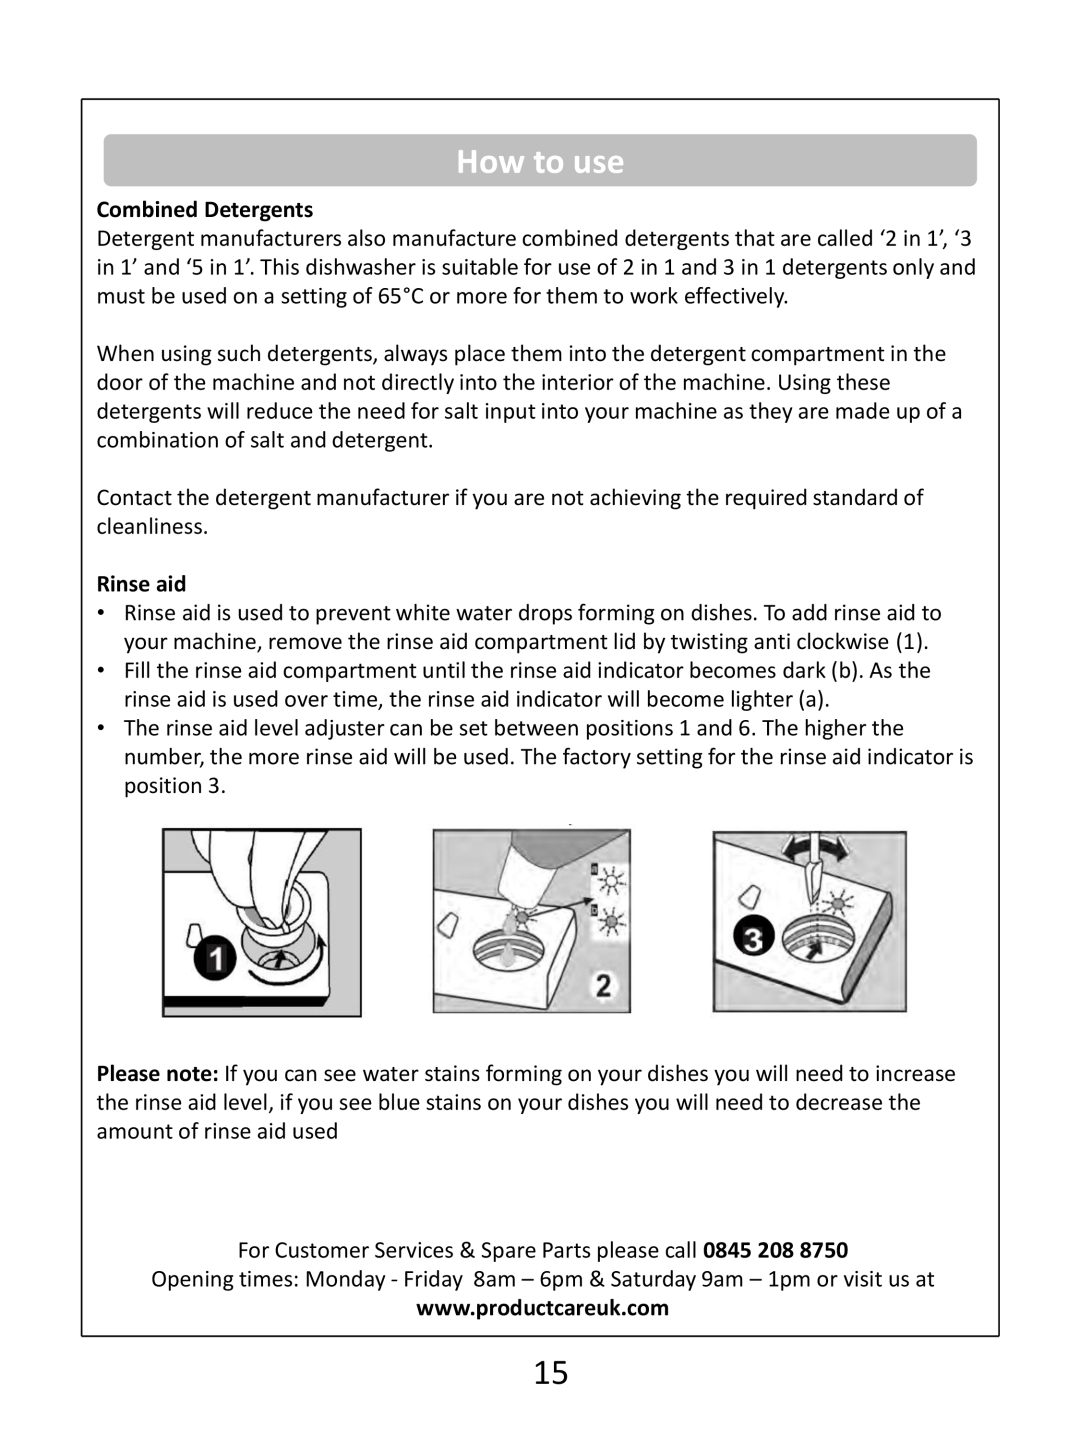 Russell Hobbs RHSLDW1S, RHSLDW1G, RHSLDW1B instruction manual How to use, Combined Detergents, Rinse aid 